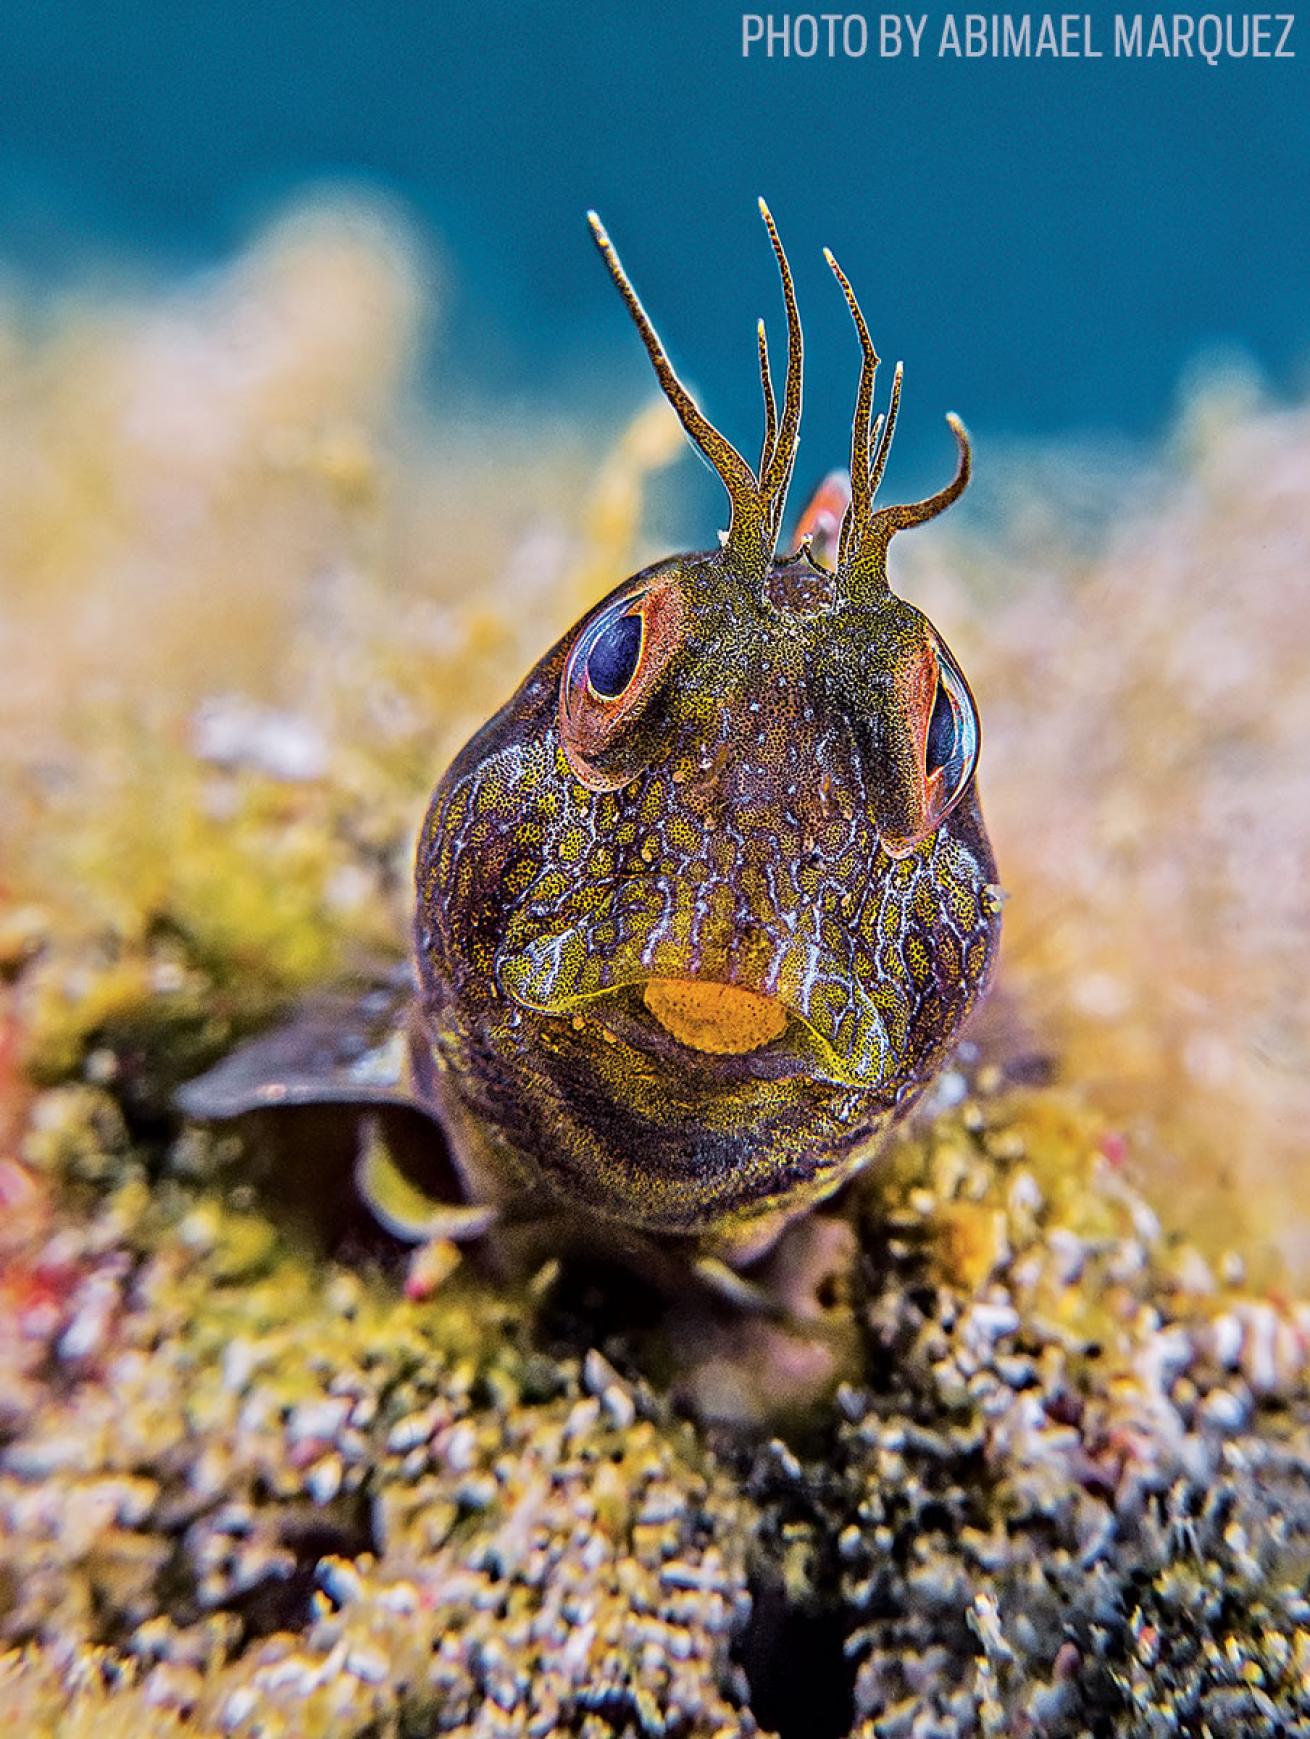 Blenny Photo: First Place Compact Camera Winner